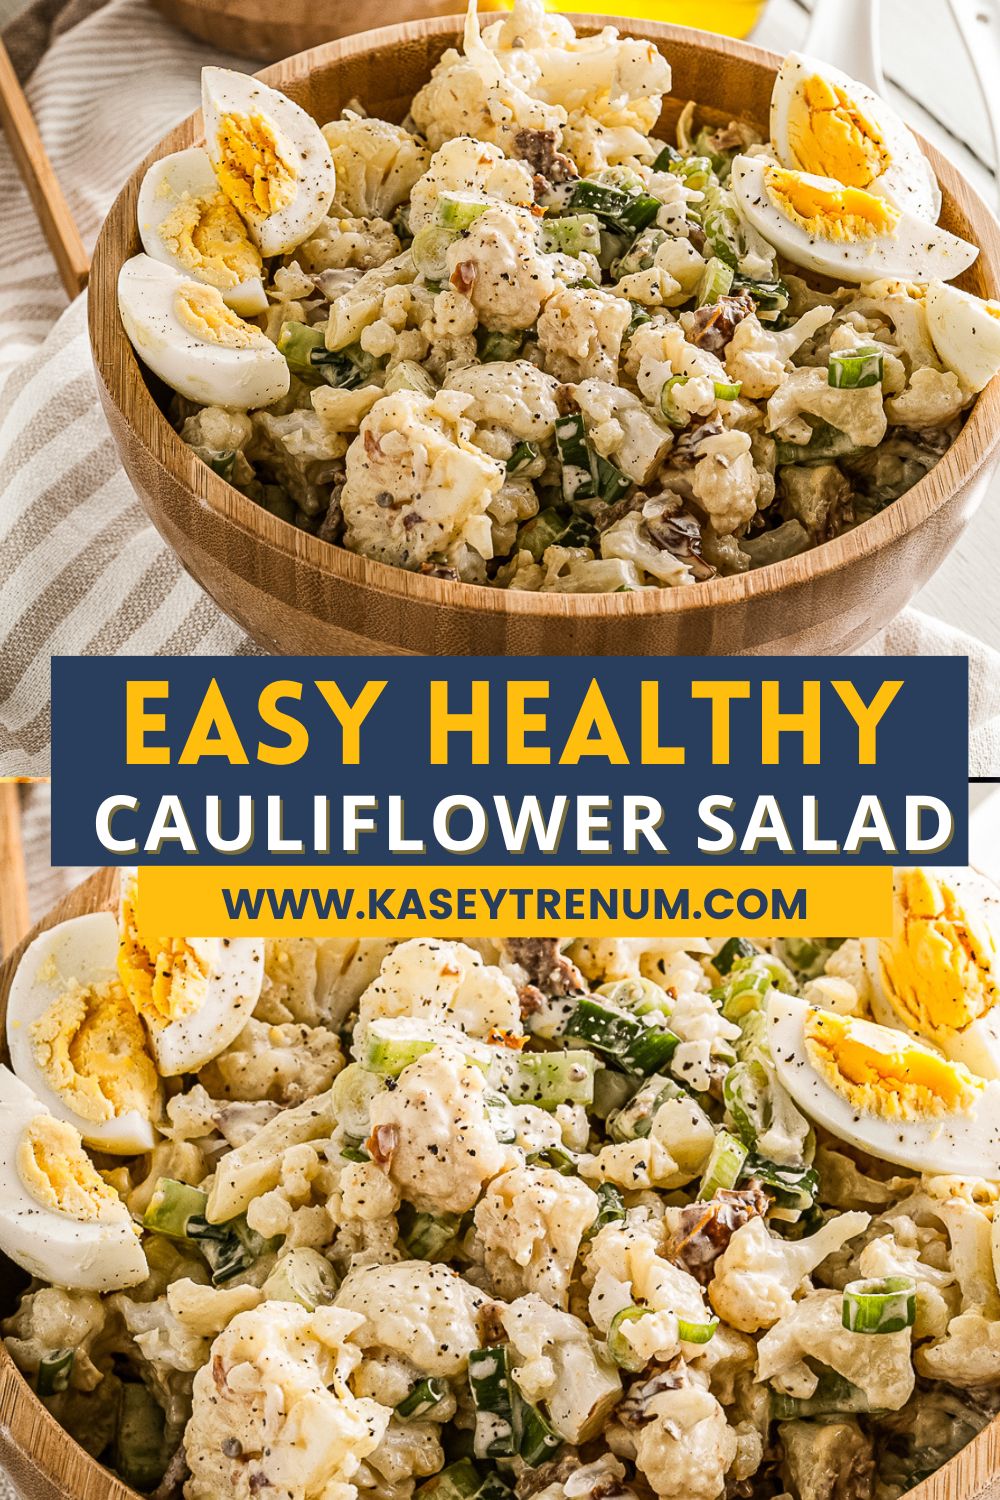 college of two images of cauliflower salad with text in the middle 